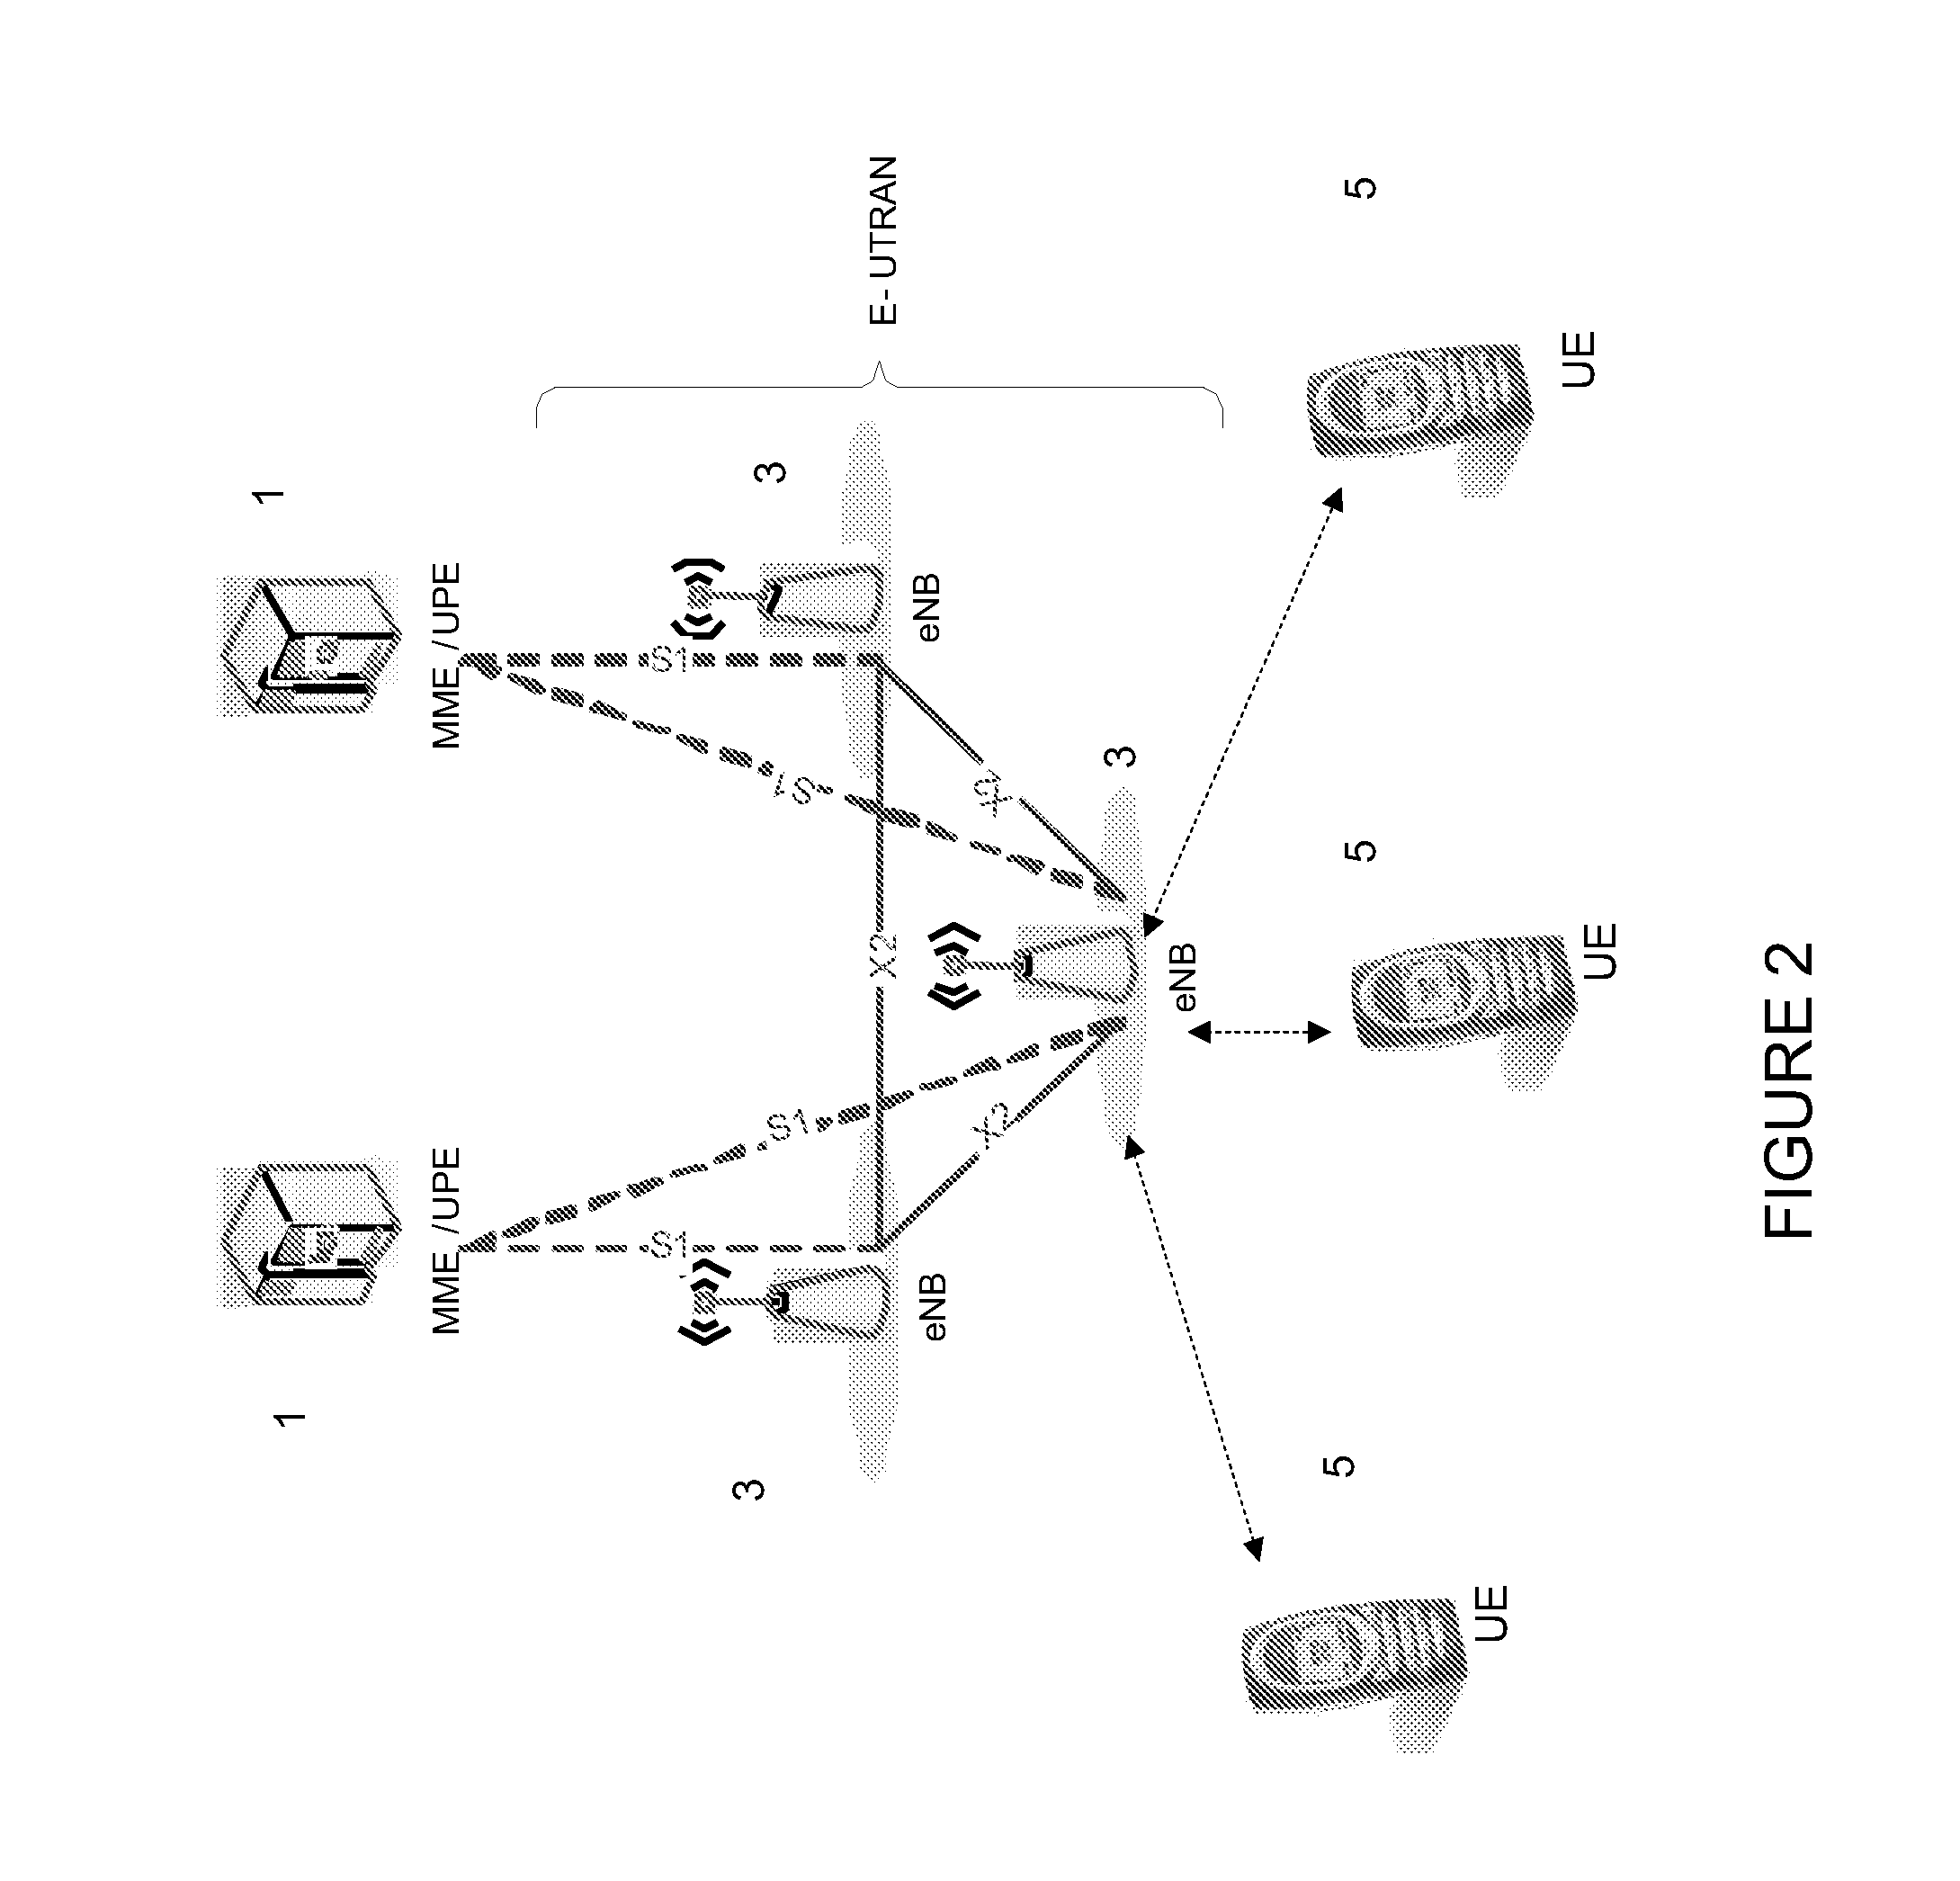 Method and apparatus for flexible spectrum usage in communications systems